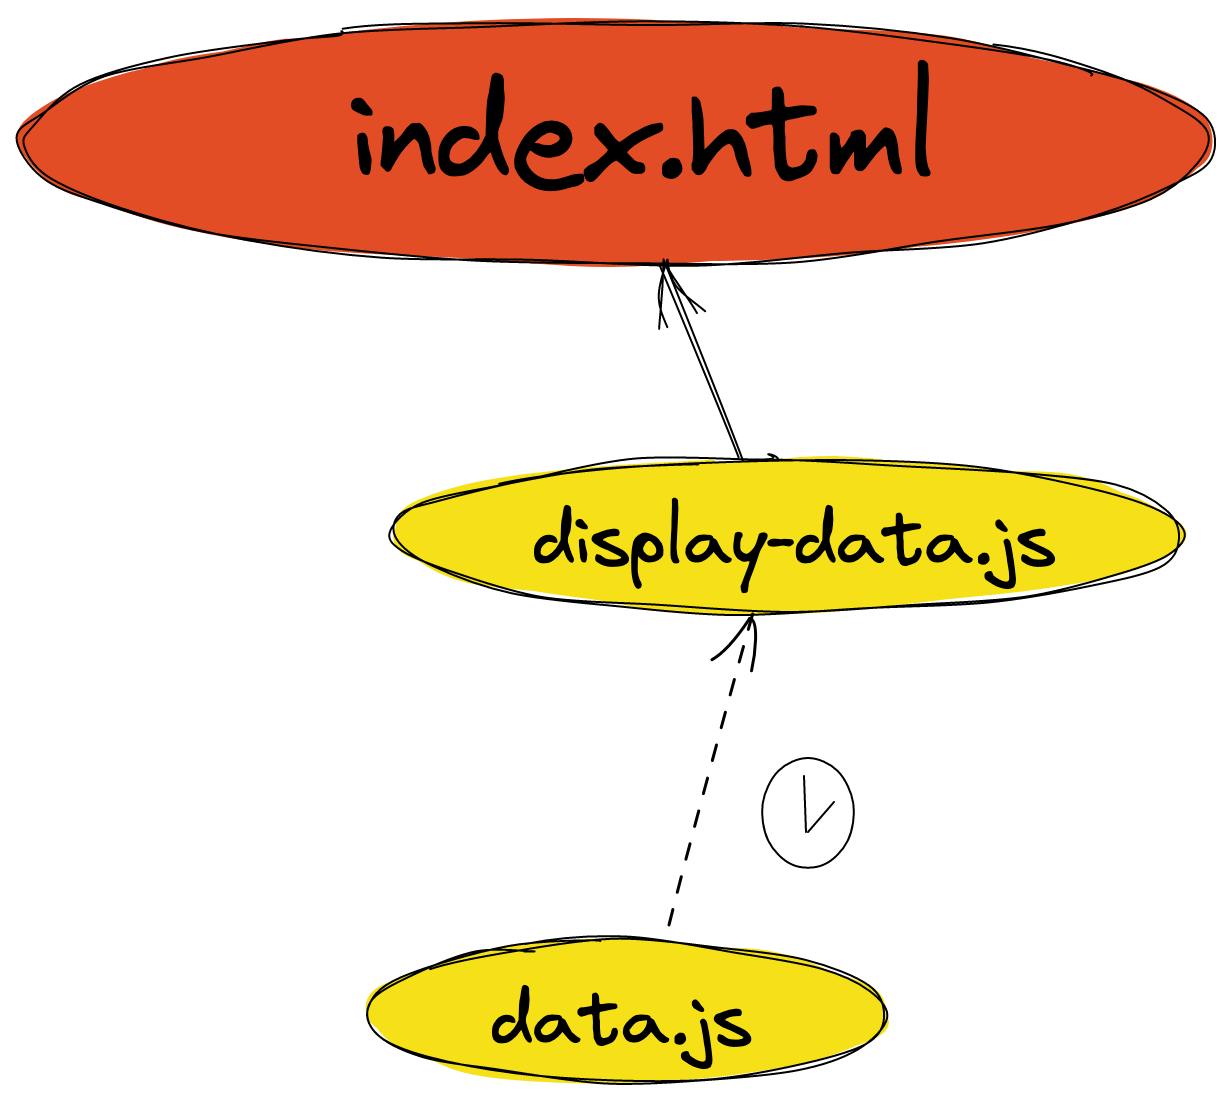 index.html imports dislay-data.js, which after delay imports data.js